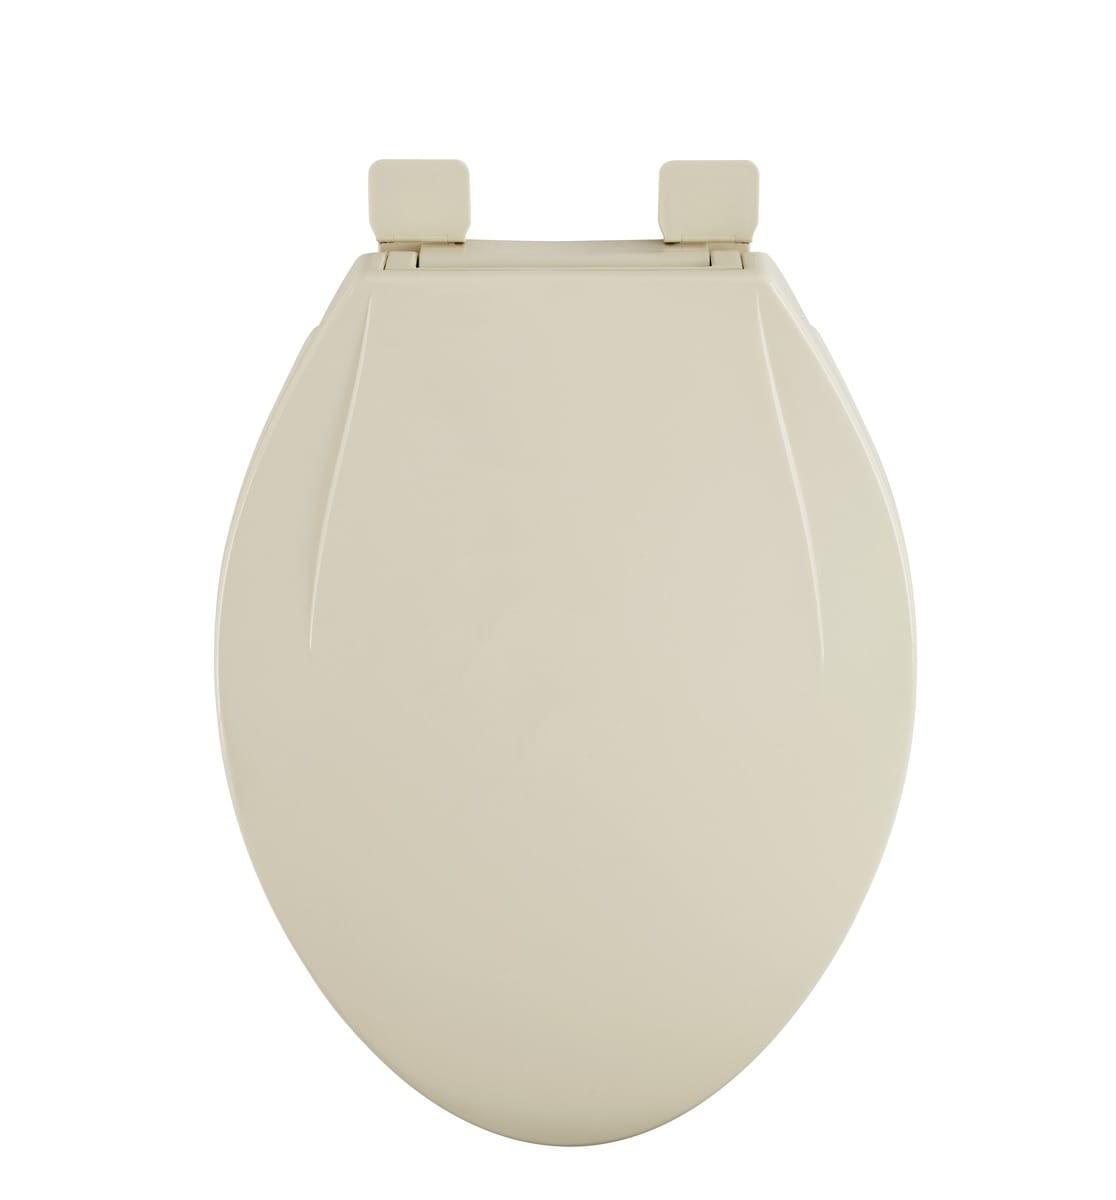 Aqua Plumb CTS100PK Round Wood Toilet Seat Pink Case of 6 for sale online 